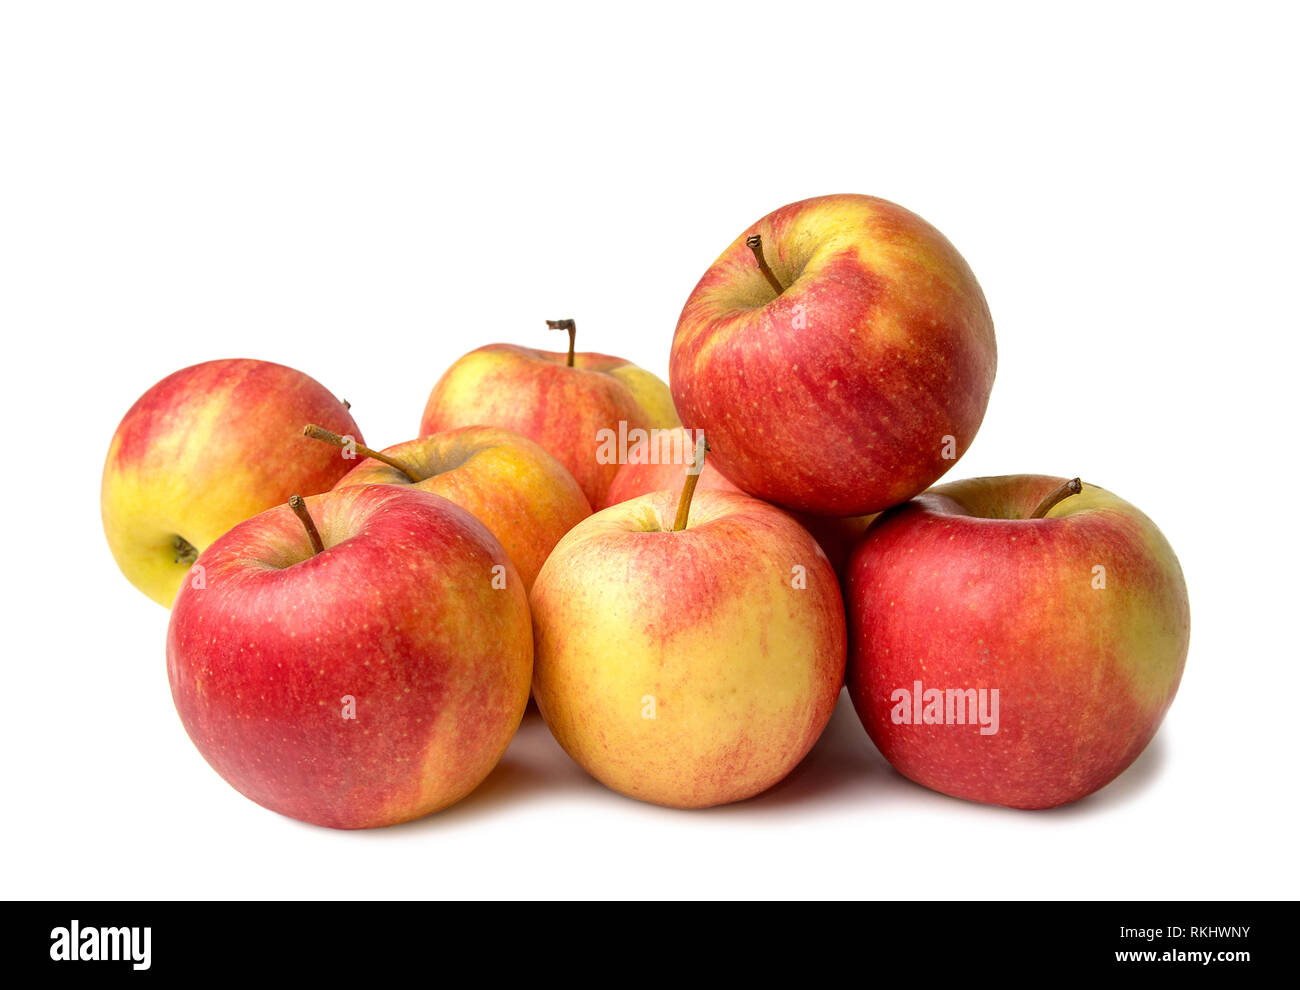 image of fruit red apples on a white background Stock Photo